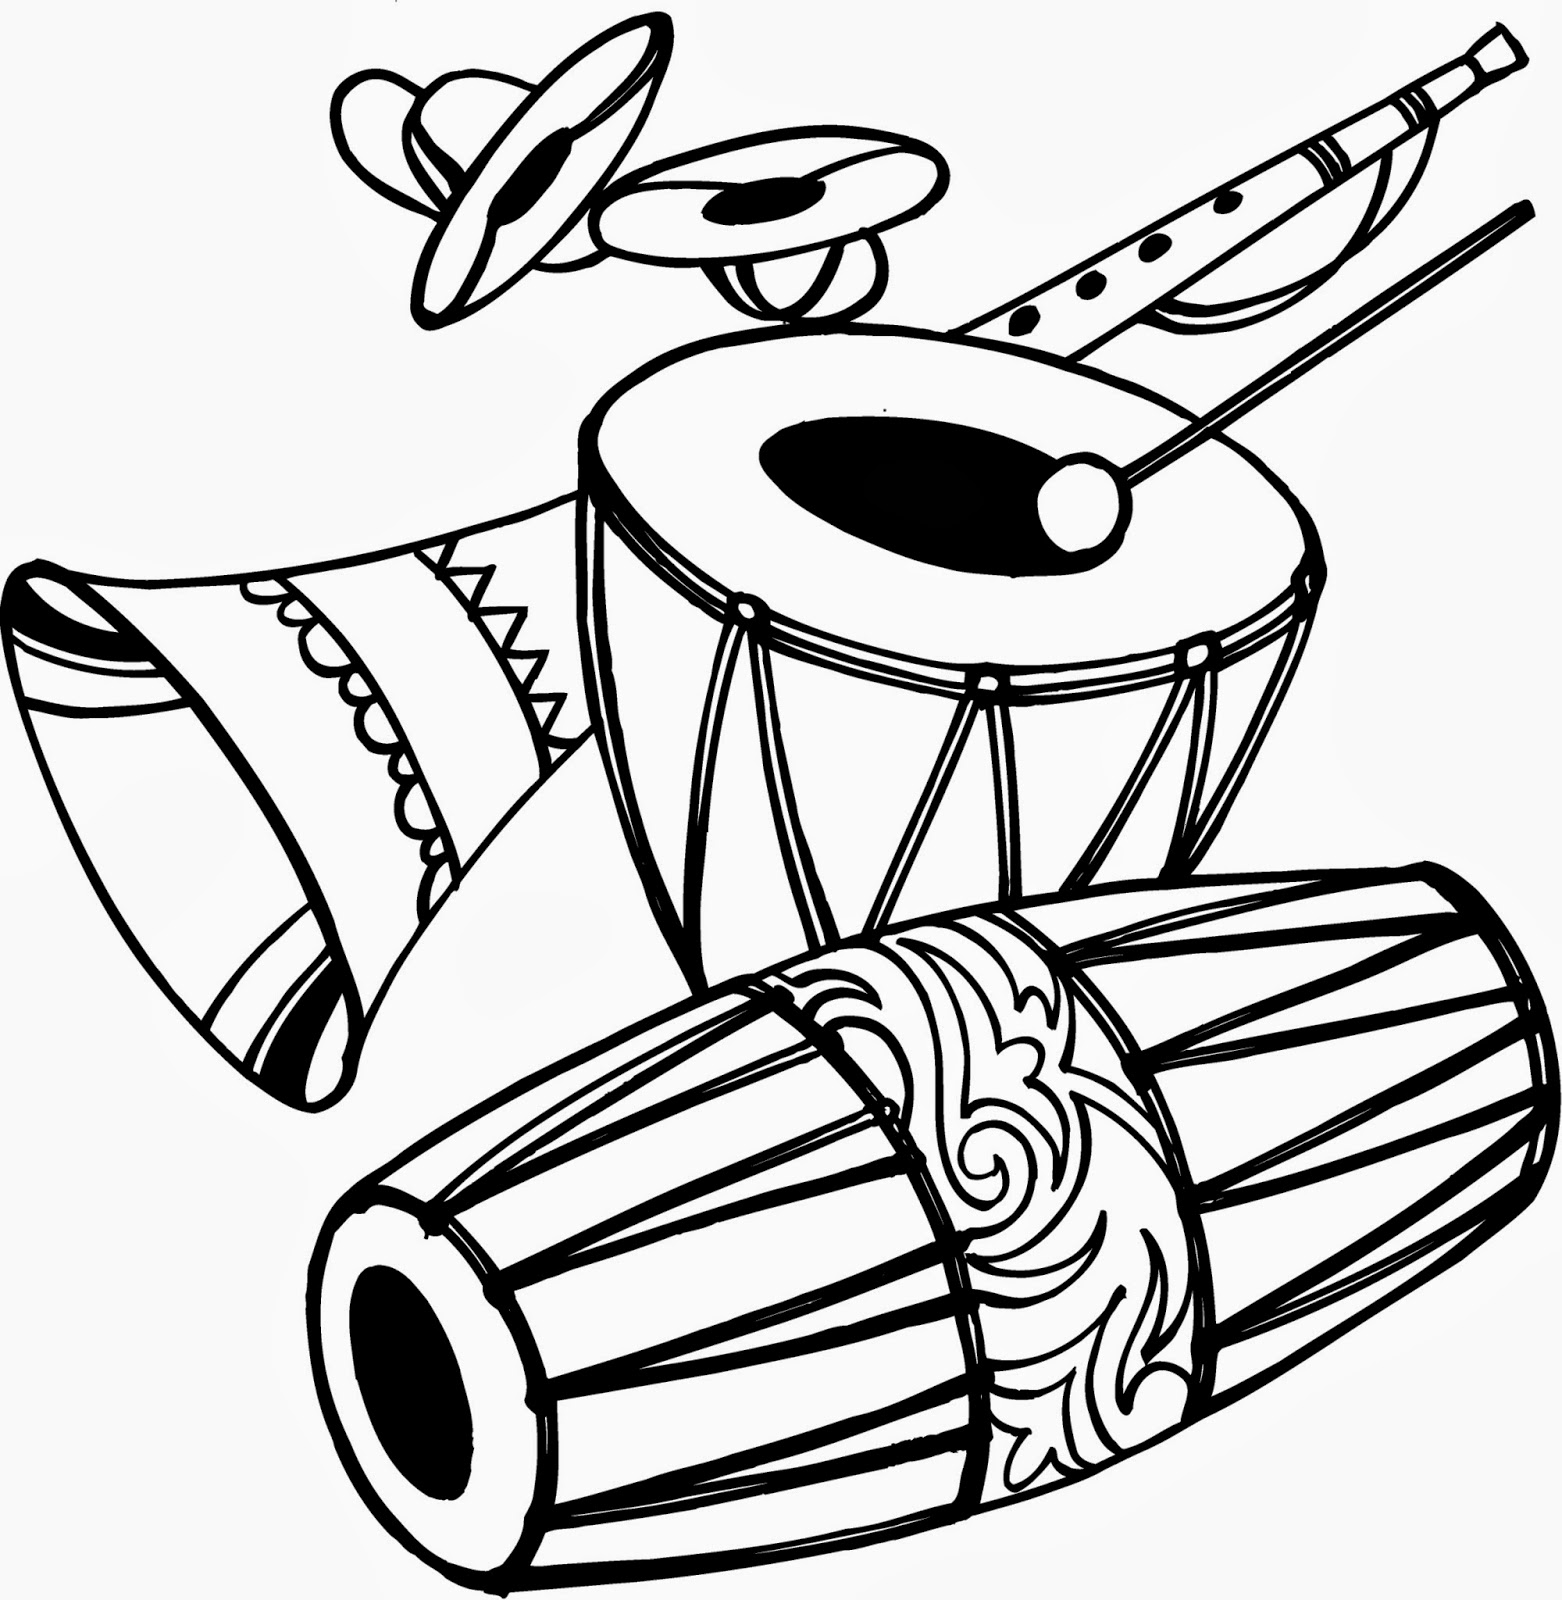 dhol clipart black and white 